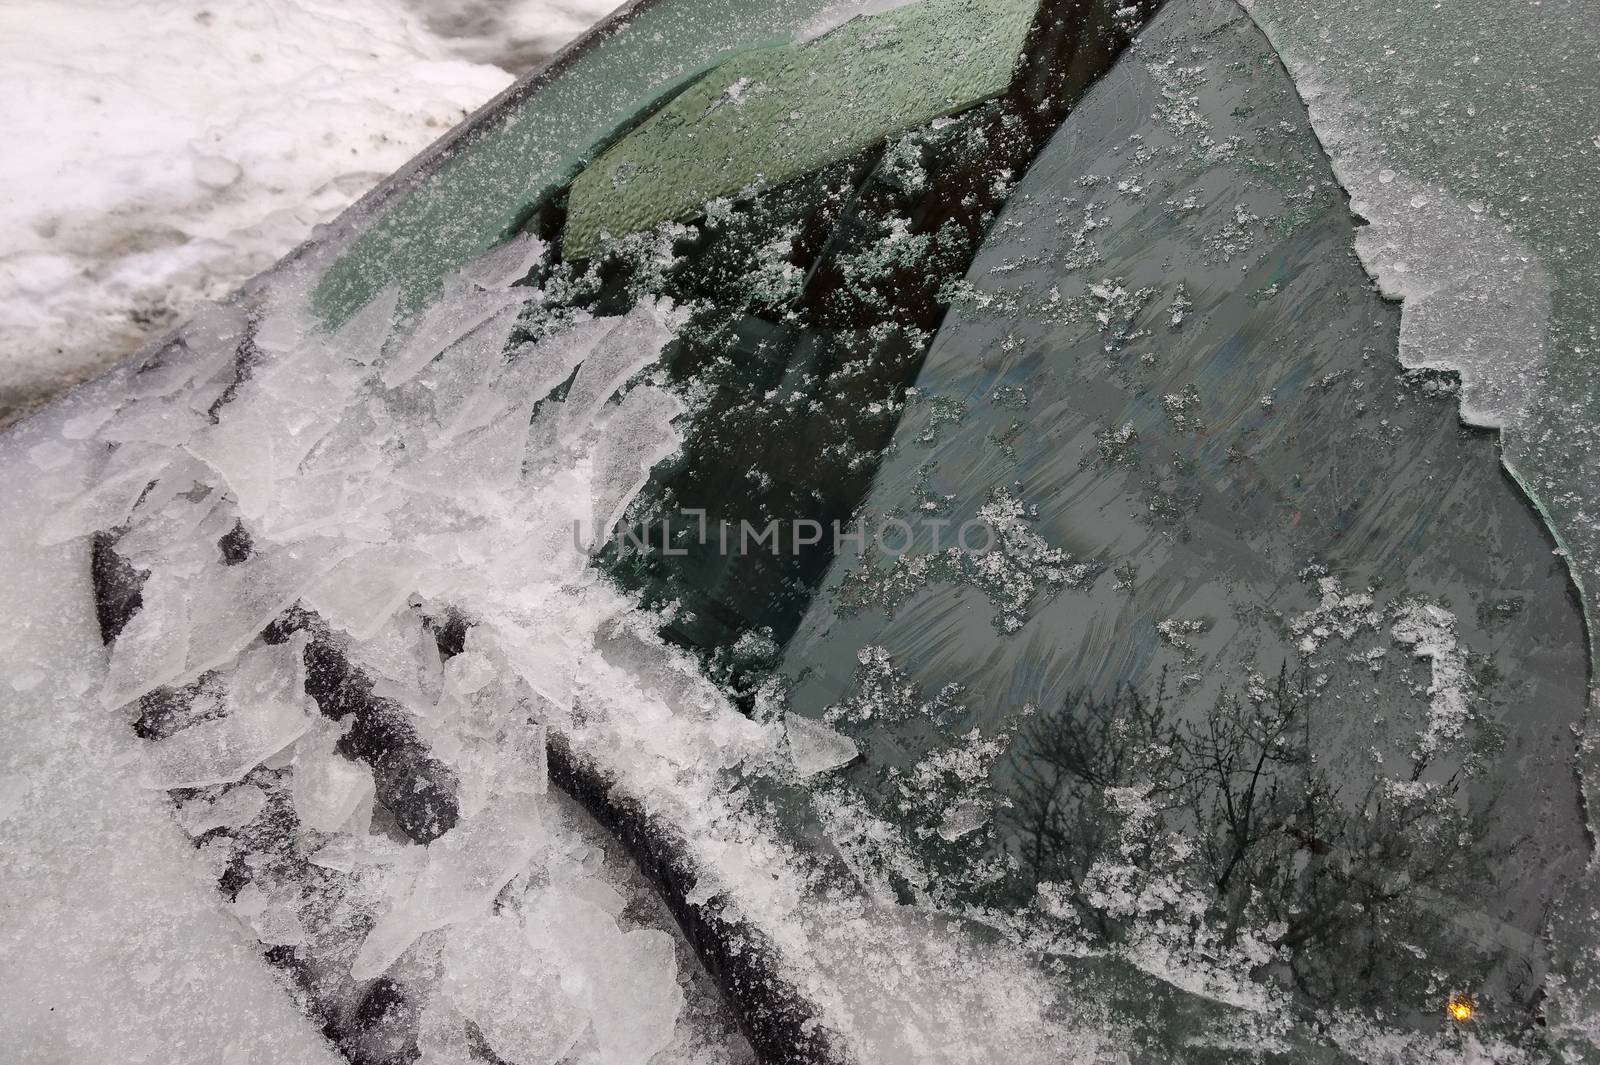 Thick layer of ice covering car after freezing rain in Montreal, Canada